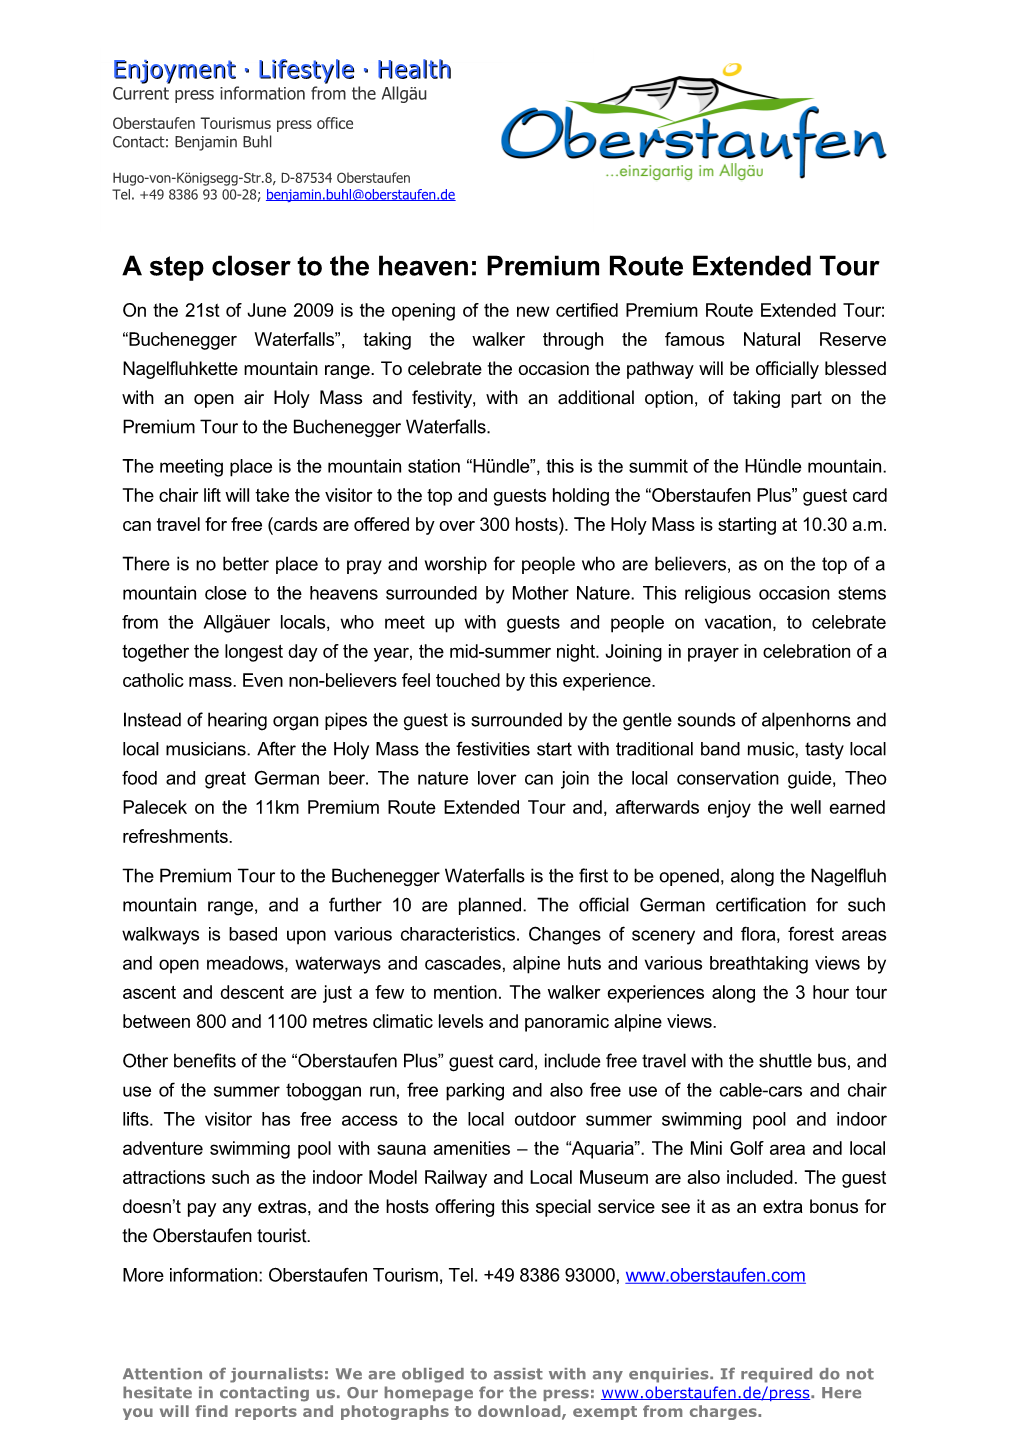 A Step Closer to the Heaven: Premium Route Extended Tour